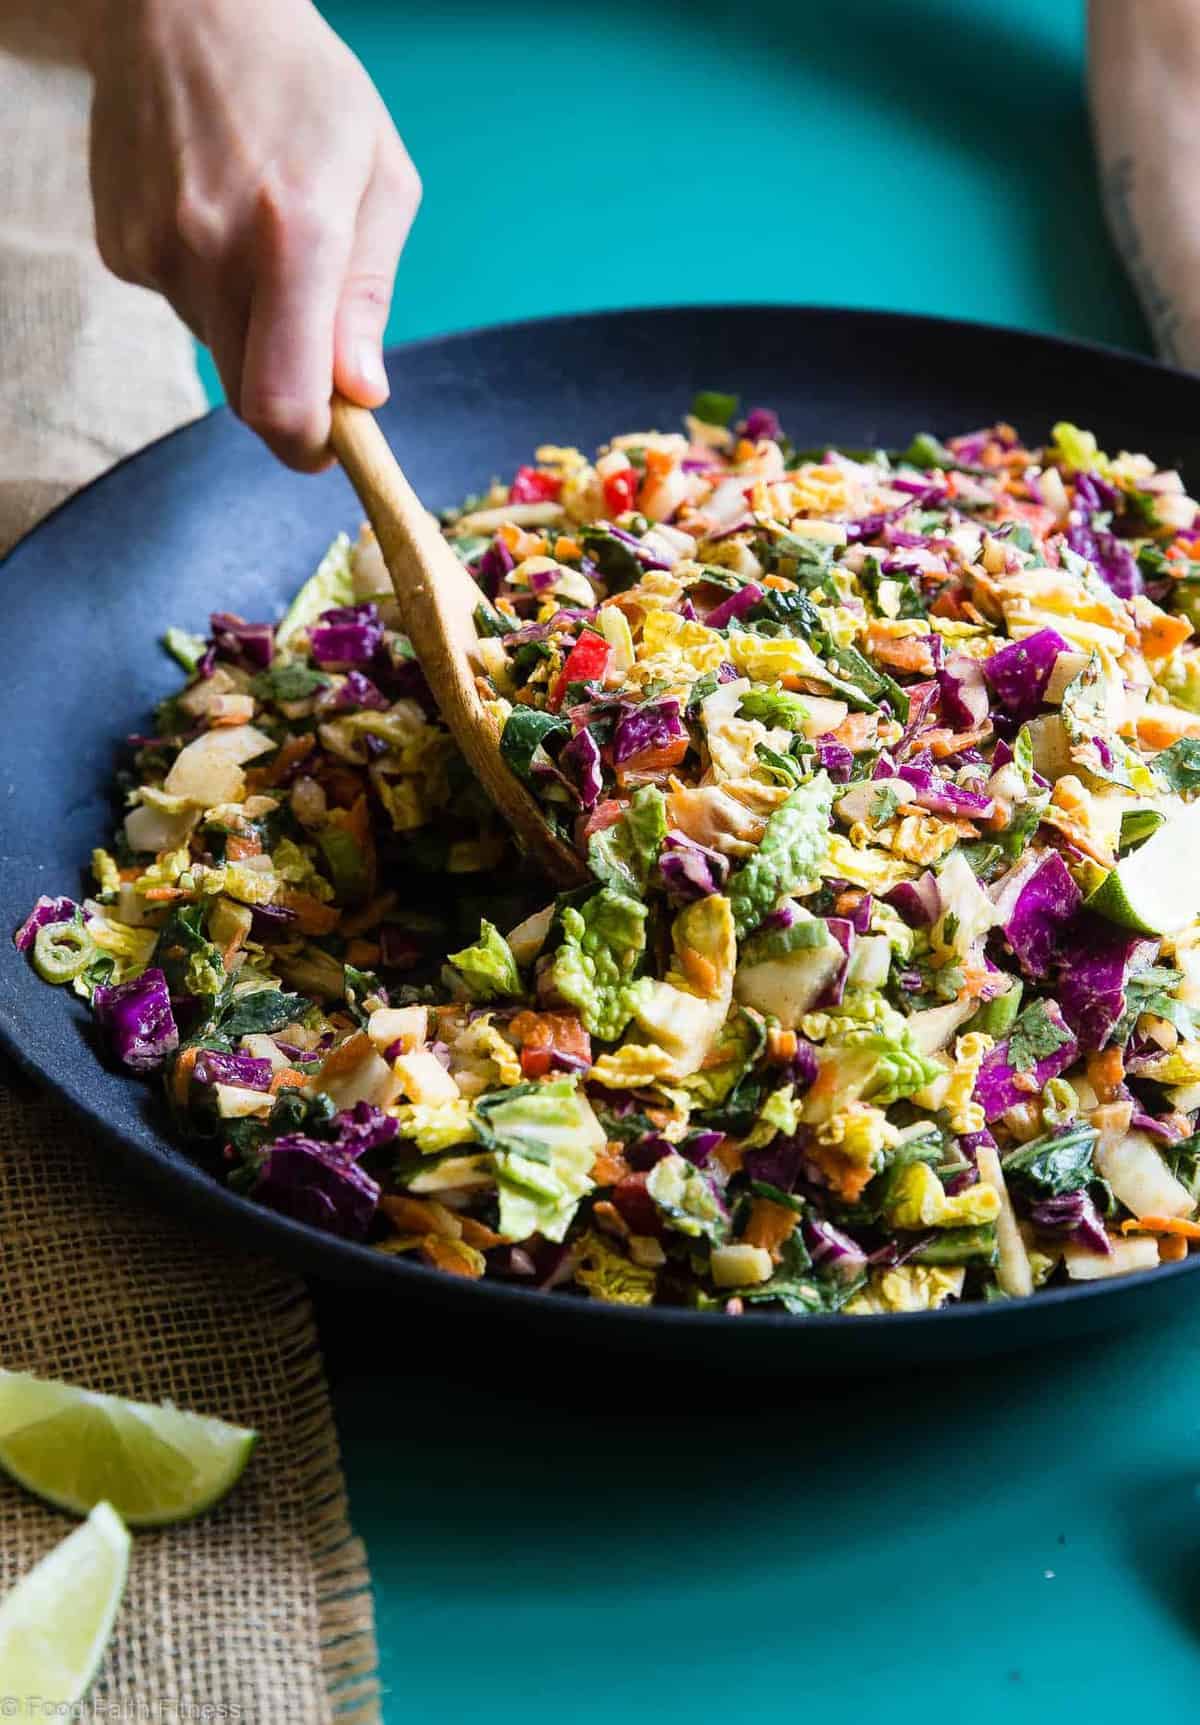 Oriental Coleslaw being served from a wok